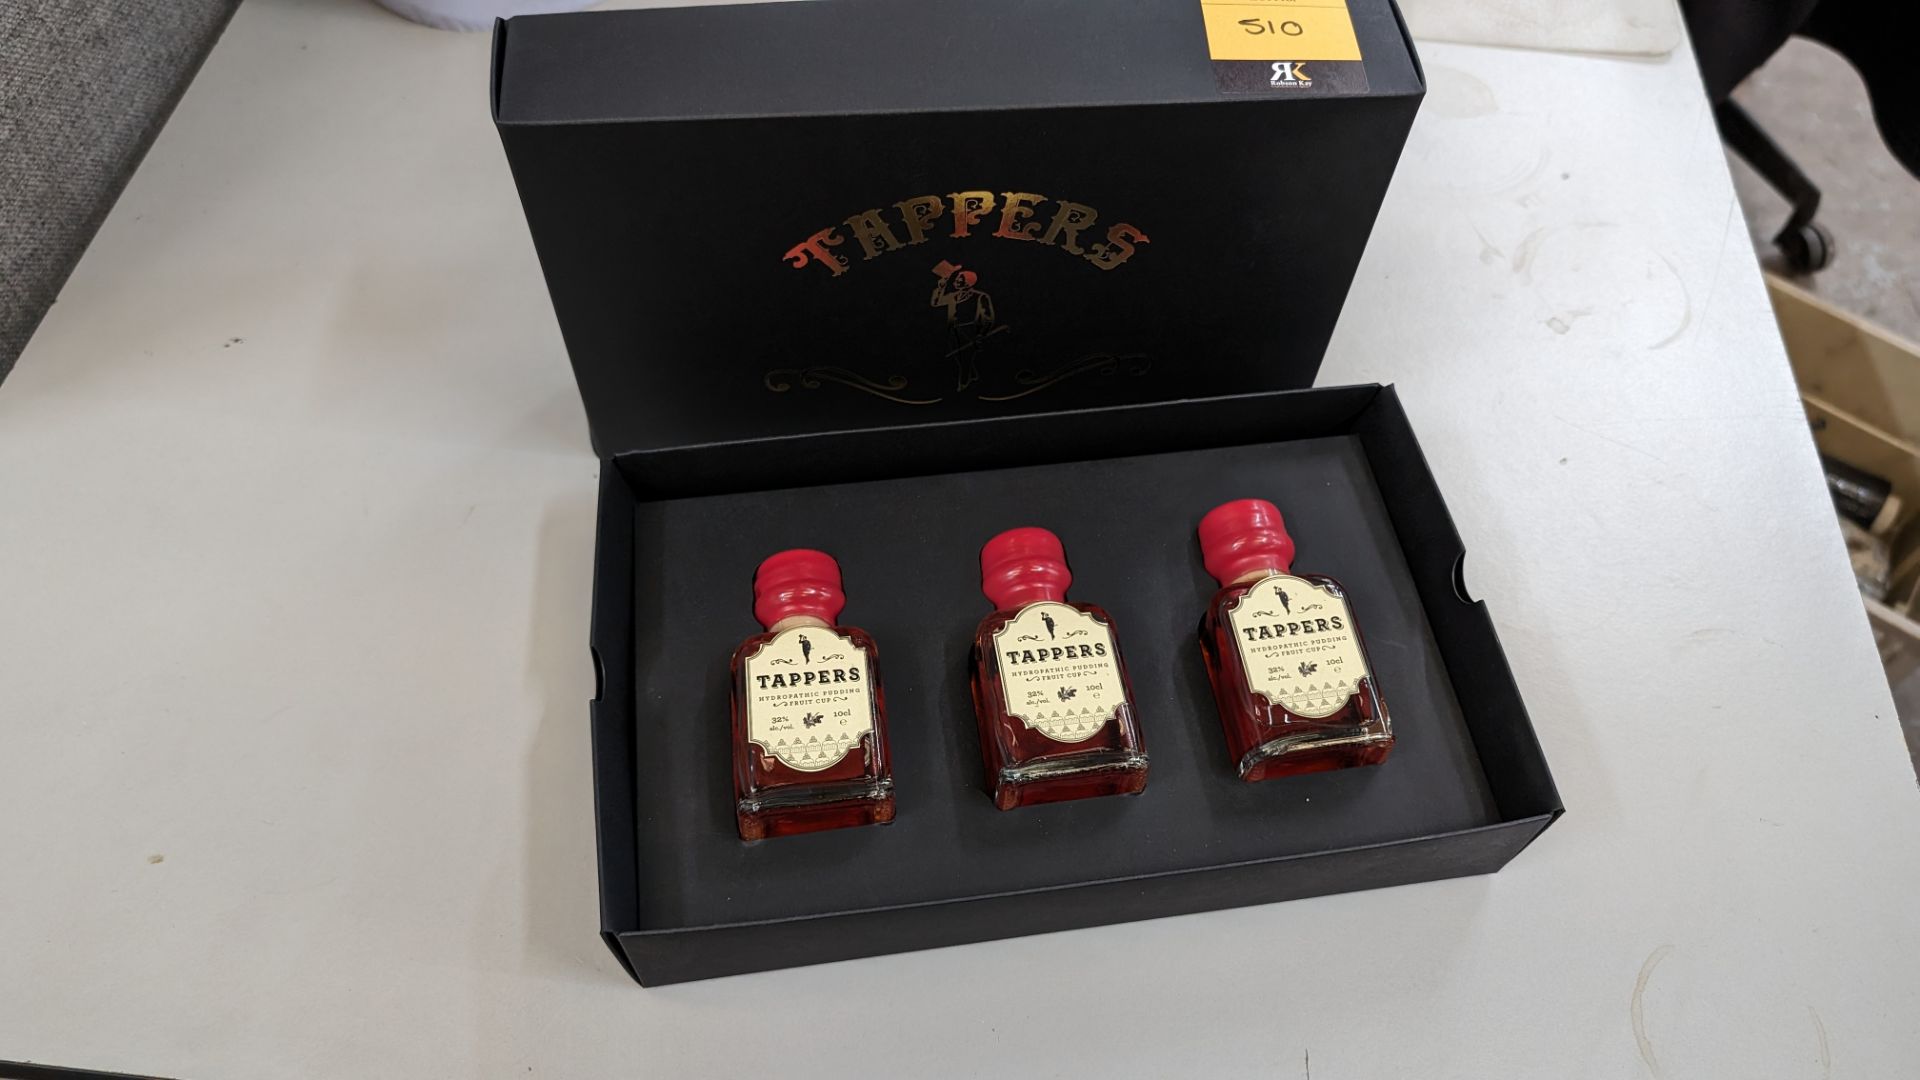 3 off 100ml bottles of Tappers Hydropathic Pudding Fruit Cup, 32% ABV, including a Tappers branded p